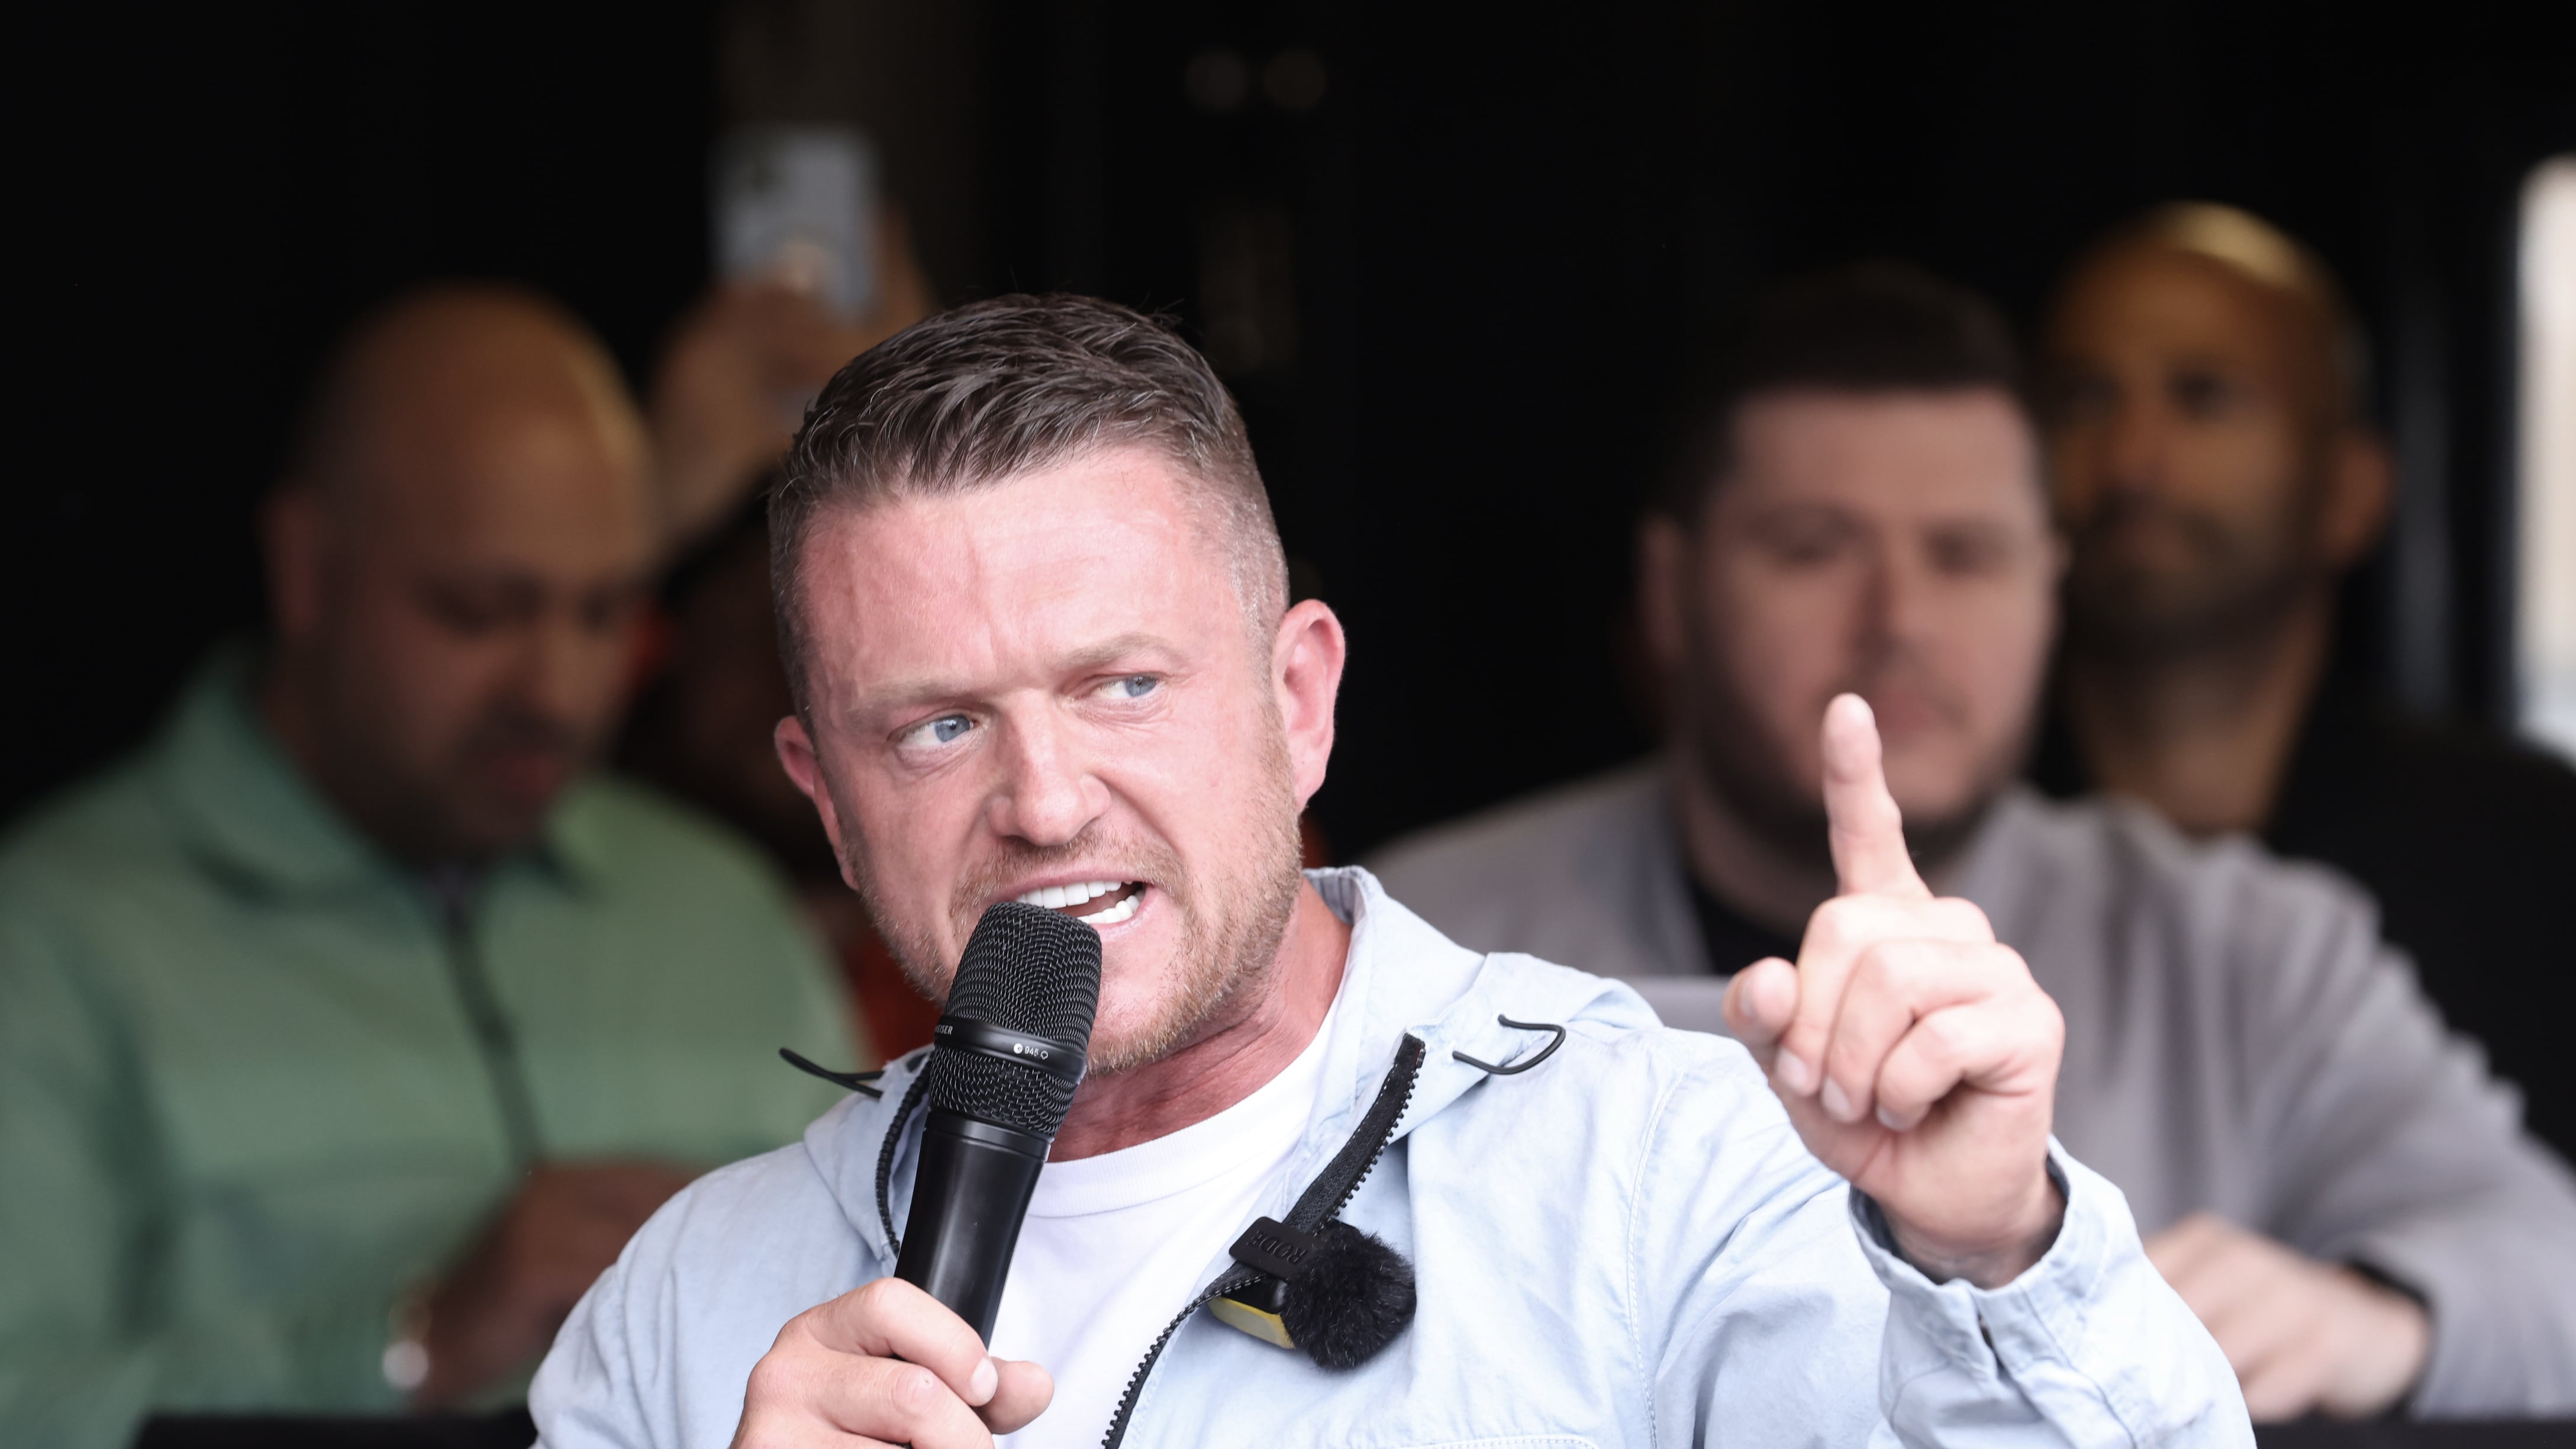 Tommy Robinson, whose real name is Stephen Yaxley Lennon